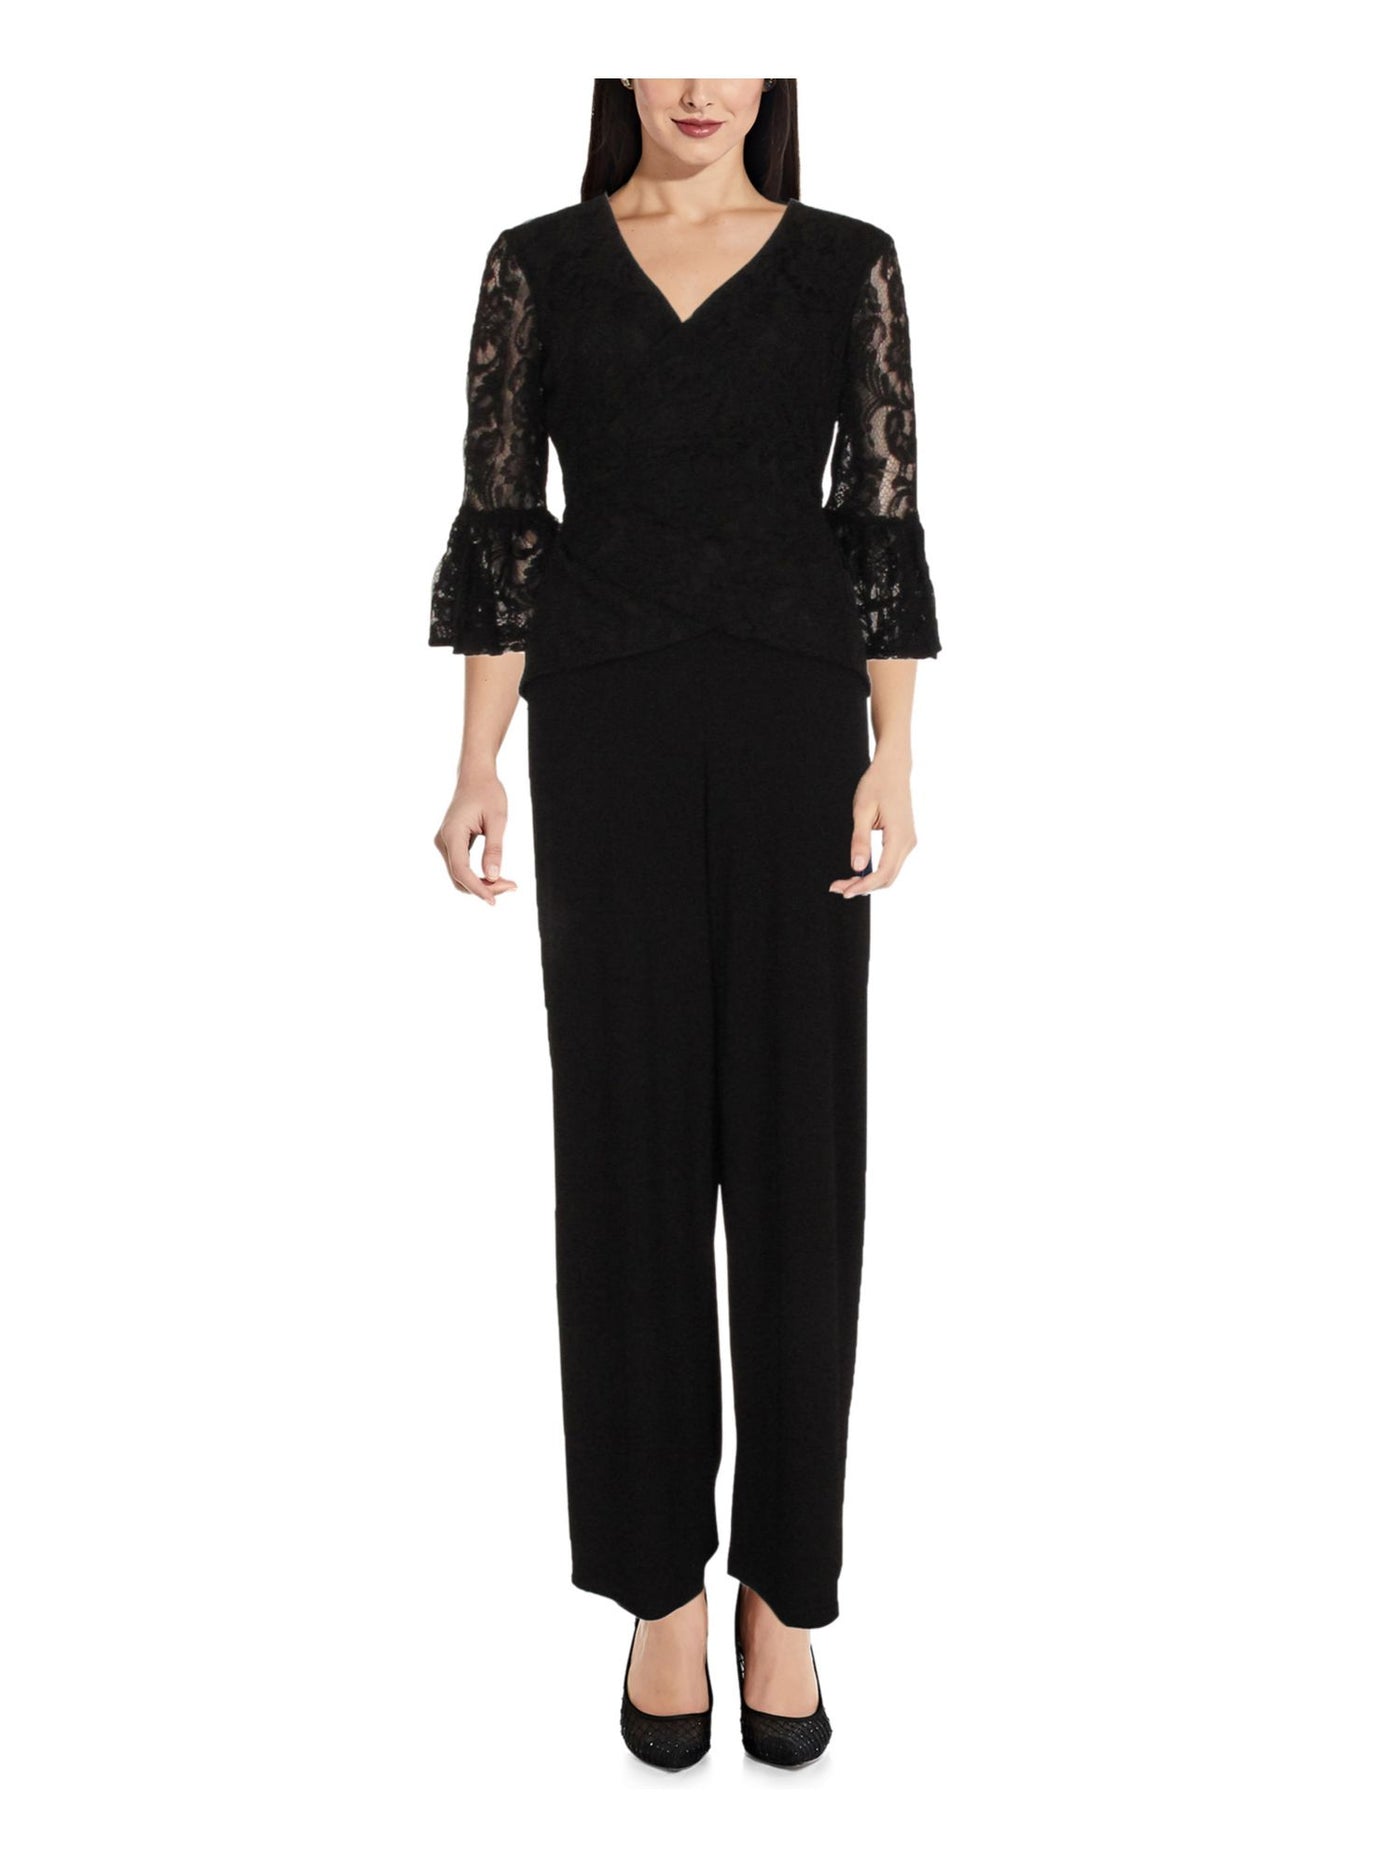 ADRIANNA PAPELL Womens Black Lace Zippered Pleated Bell Sleeve Surplice Neckline Formal Jumpsuit 0